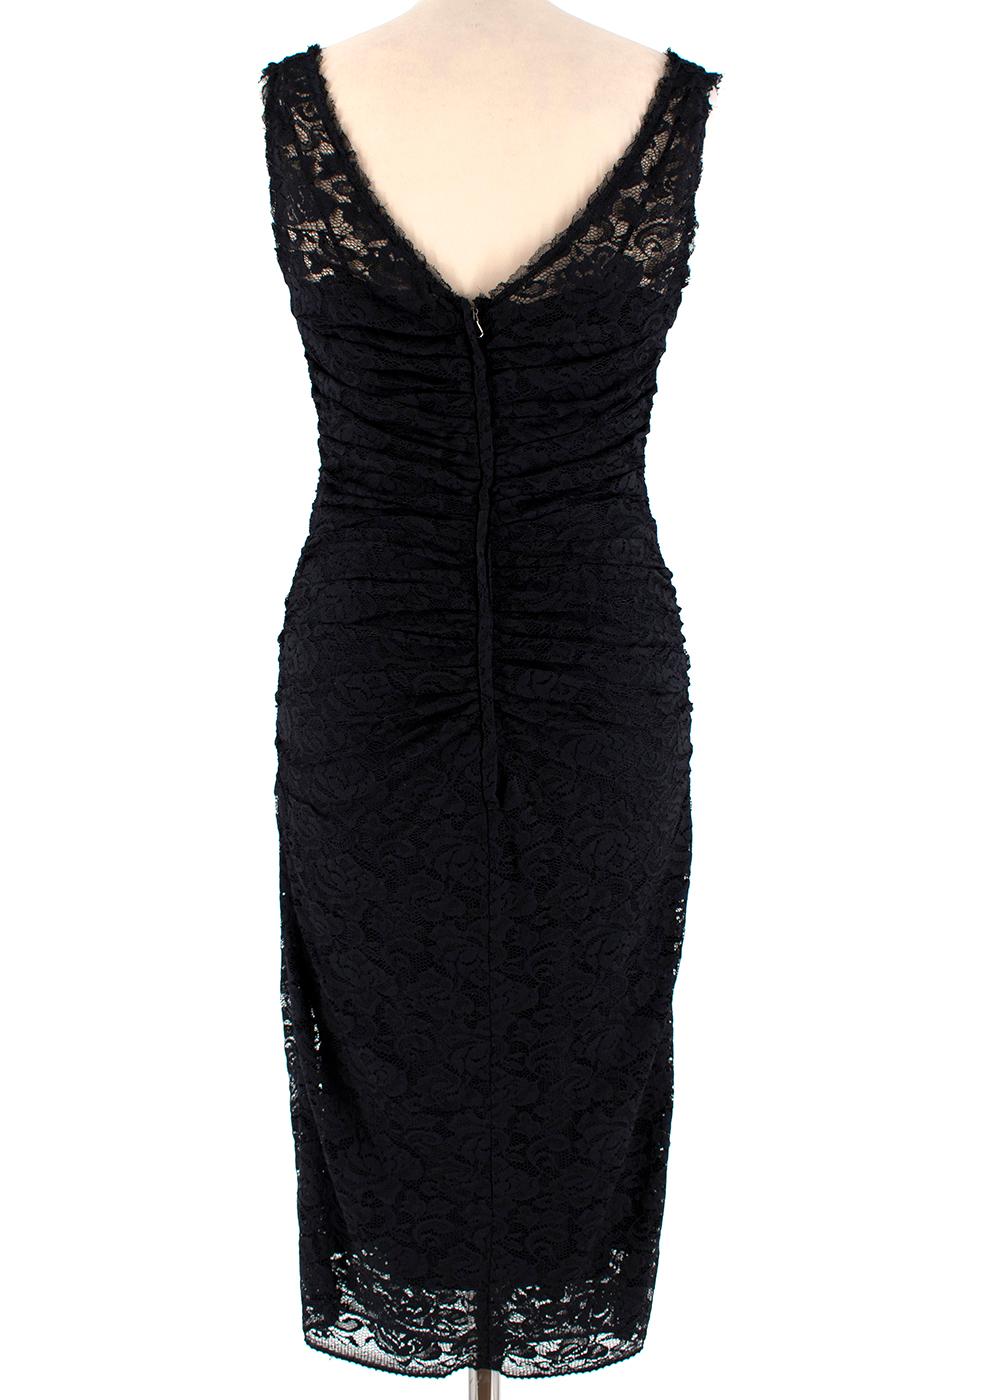 Dolce & Gabbana Black Lace Ruched Sleeveless Dress - Size US 6 In New Condition For Sale In London, GB